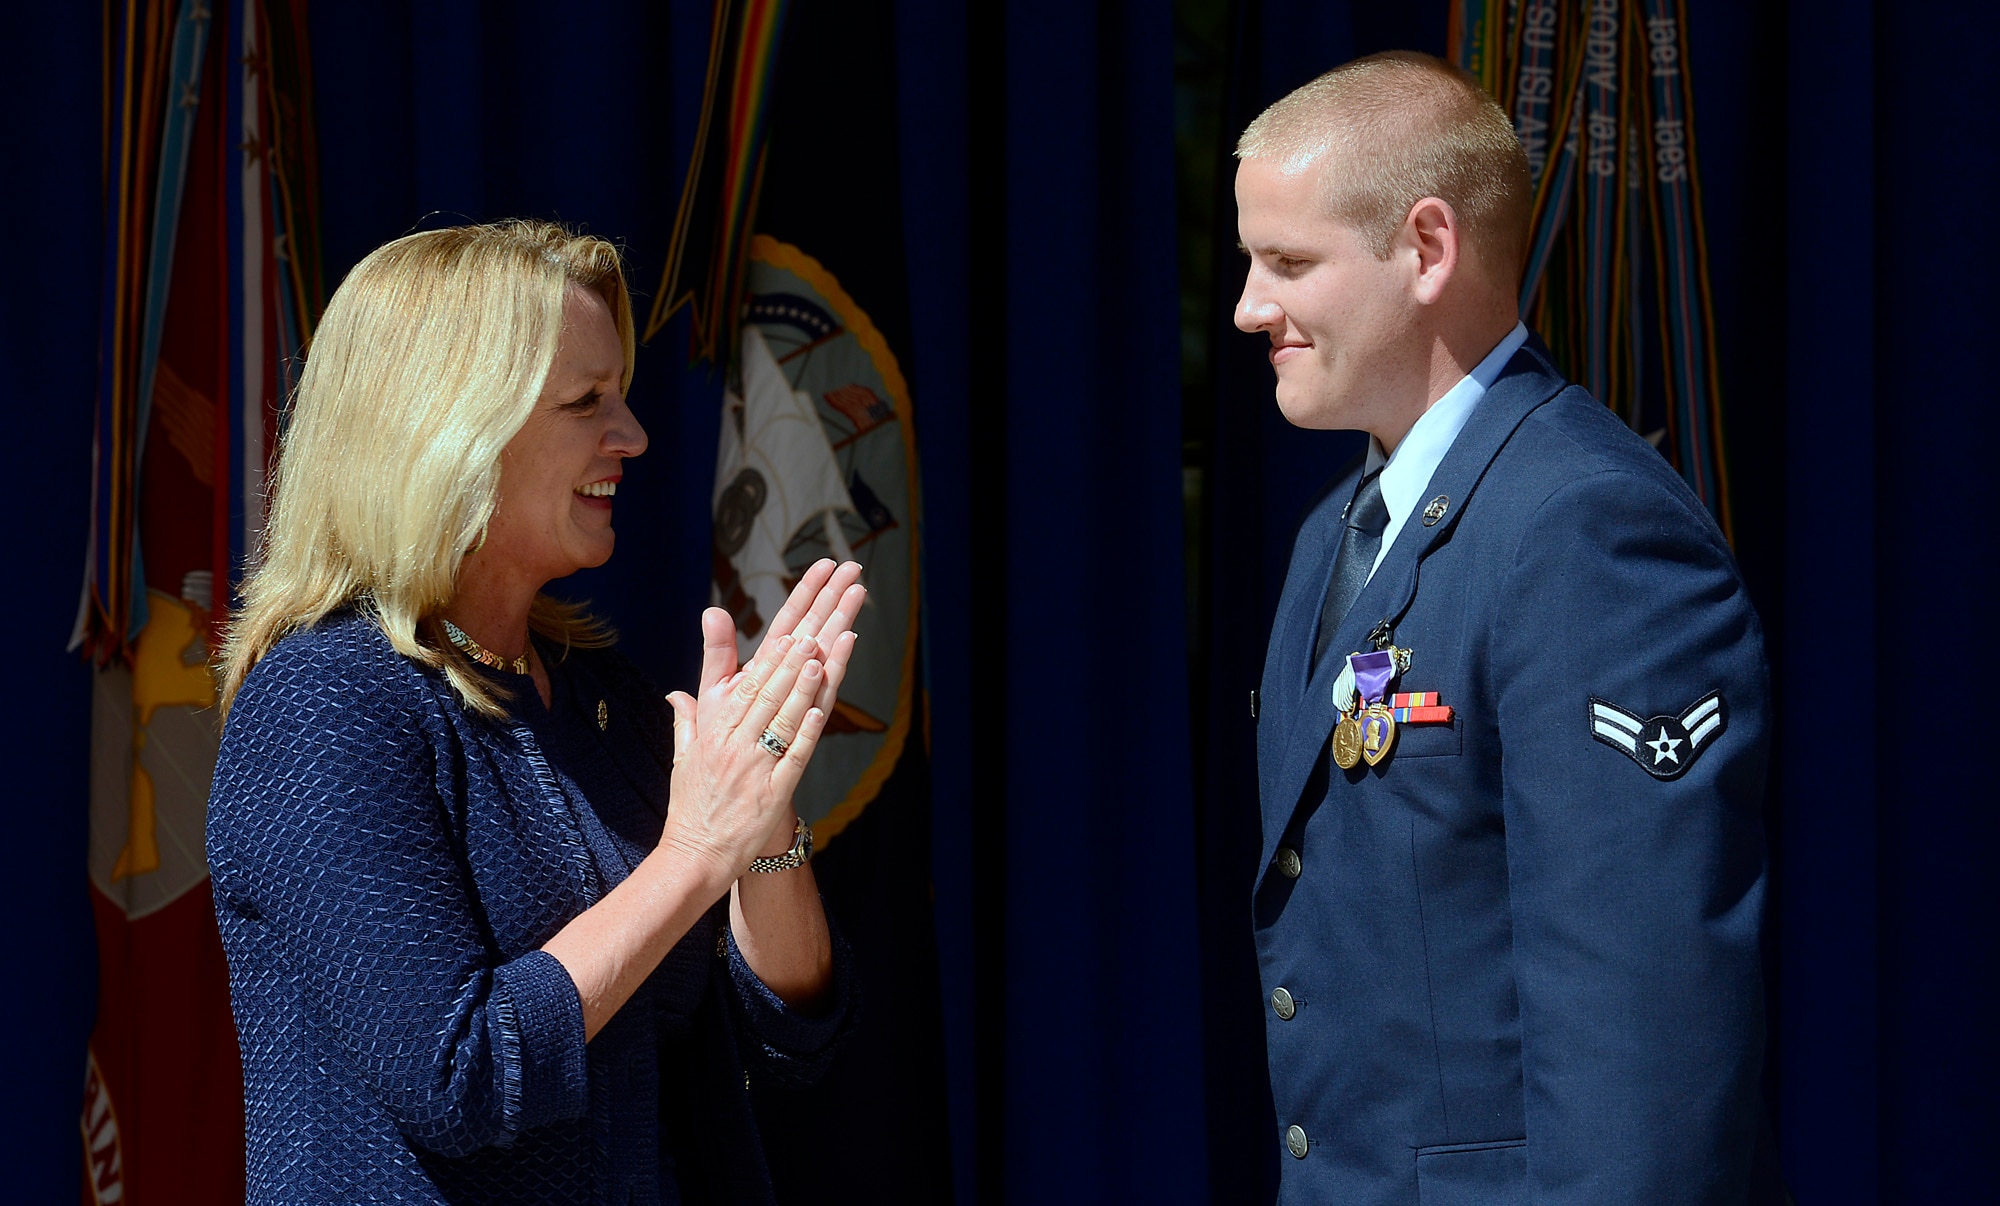 Secretary of the Air Force Deborah Lee James congratulates Airman 1st Class Spencer Stone at the Heroes of the Rails ceremony at the Pentagon in Washington, D.C., Sept. 17, 2015. Stone was awarded the Airman’s Medal and the Purple Heart for bravery and valor during his heroic actions on the train bound for Paris. (U.S. Air Force photo/Scott Ash)                                                                                               